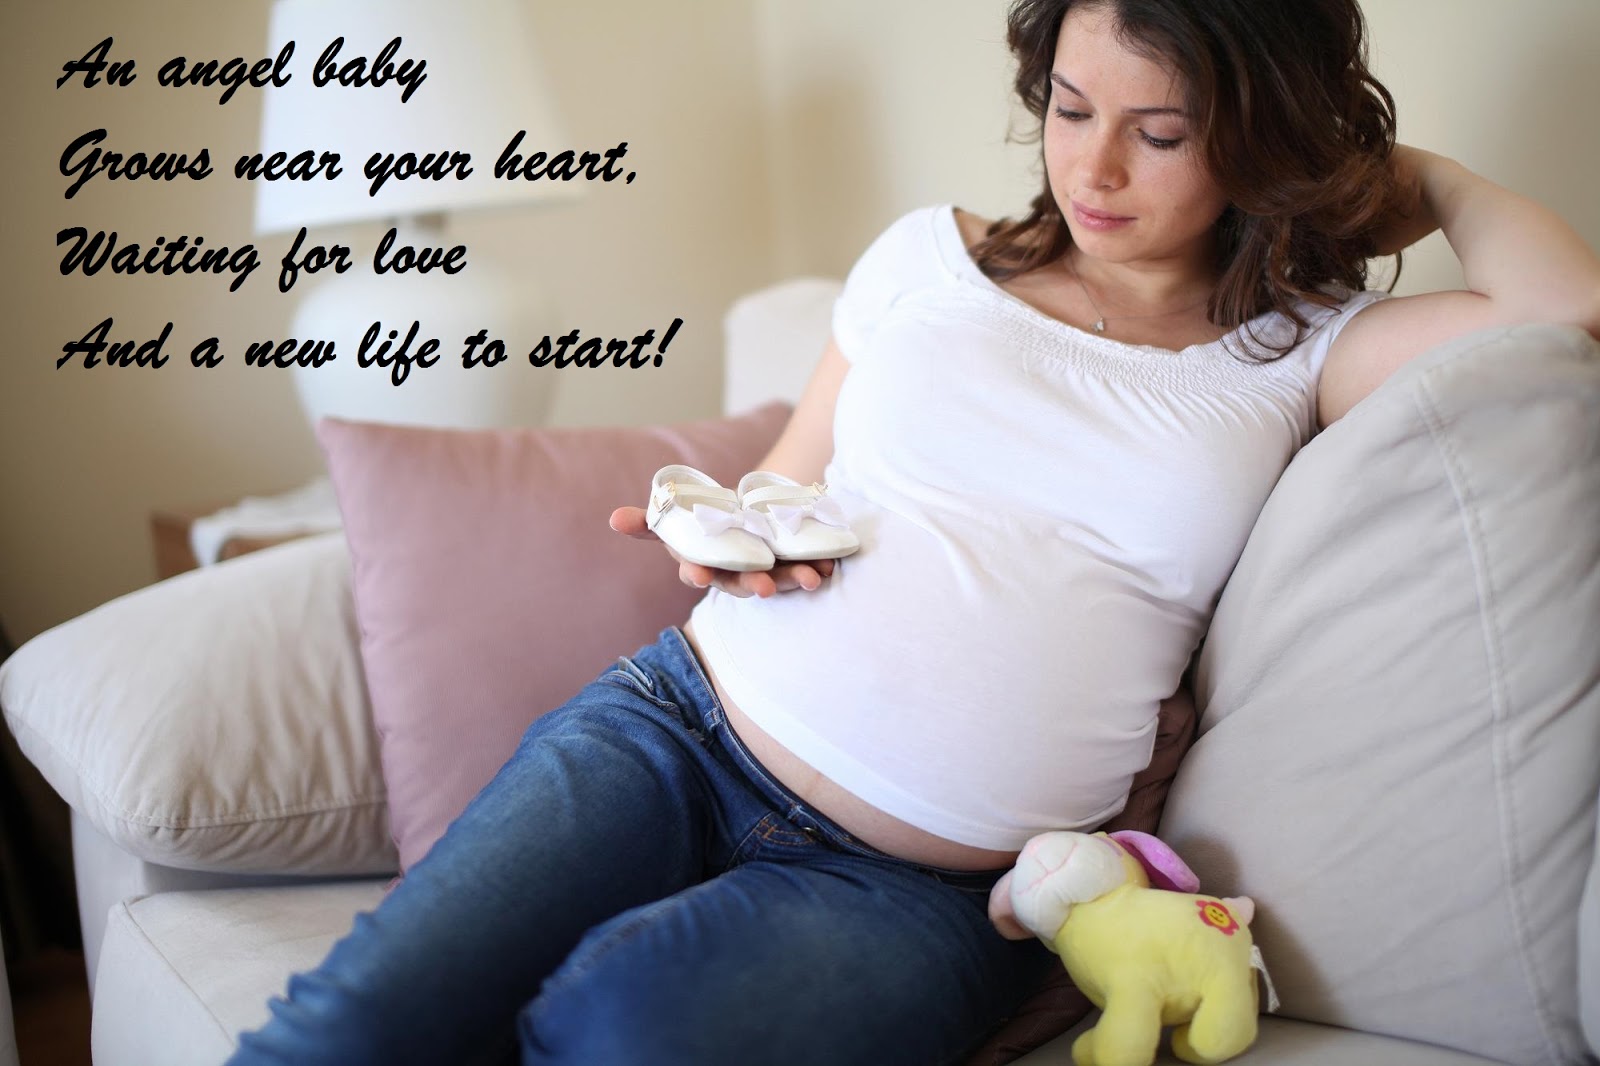 Humorous Messages On Getting Pregnant Pregnancy Wishes Beautiful